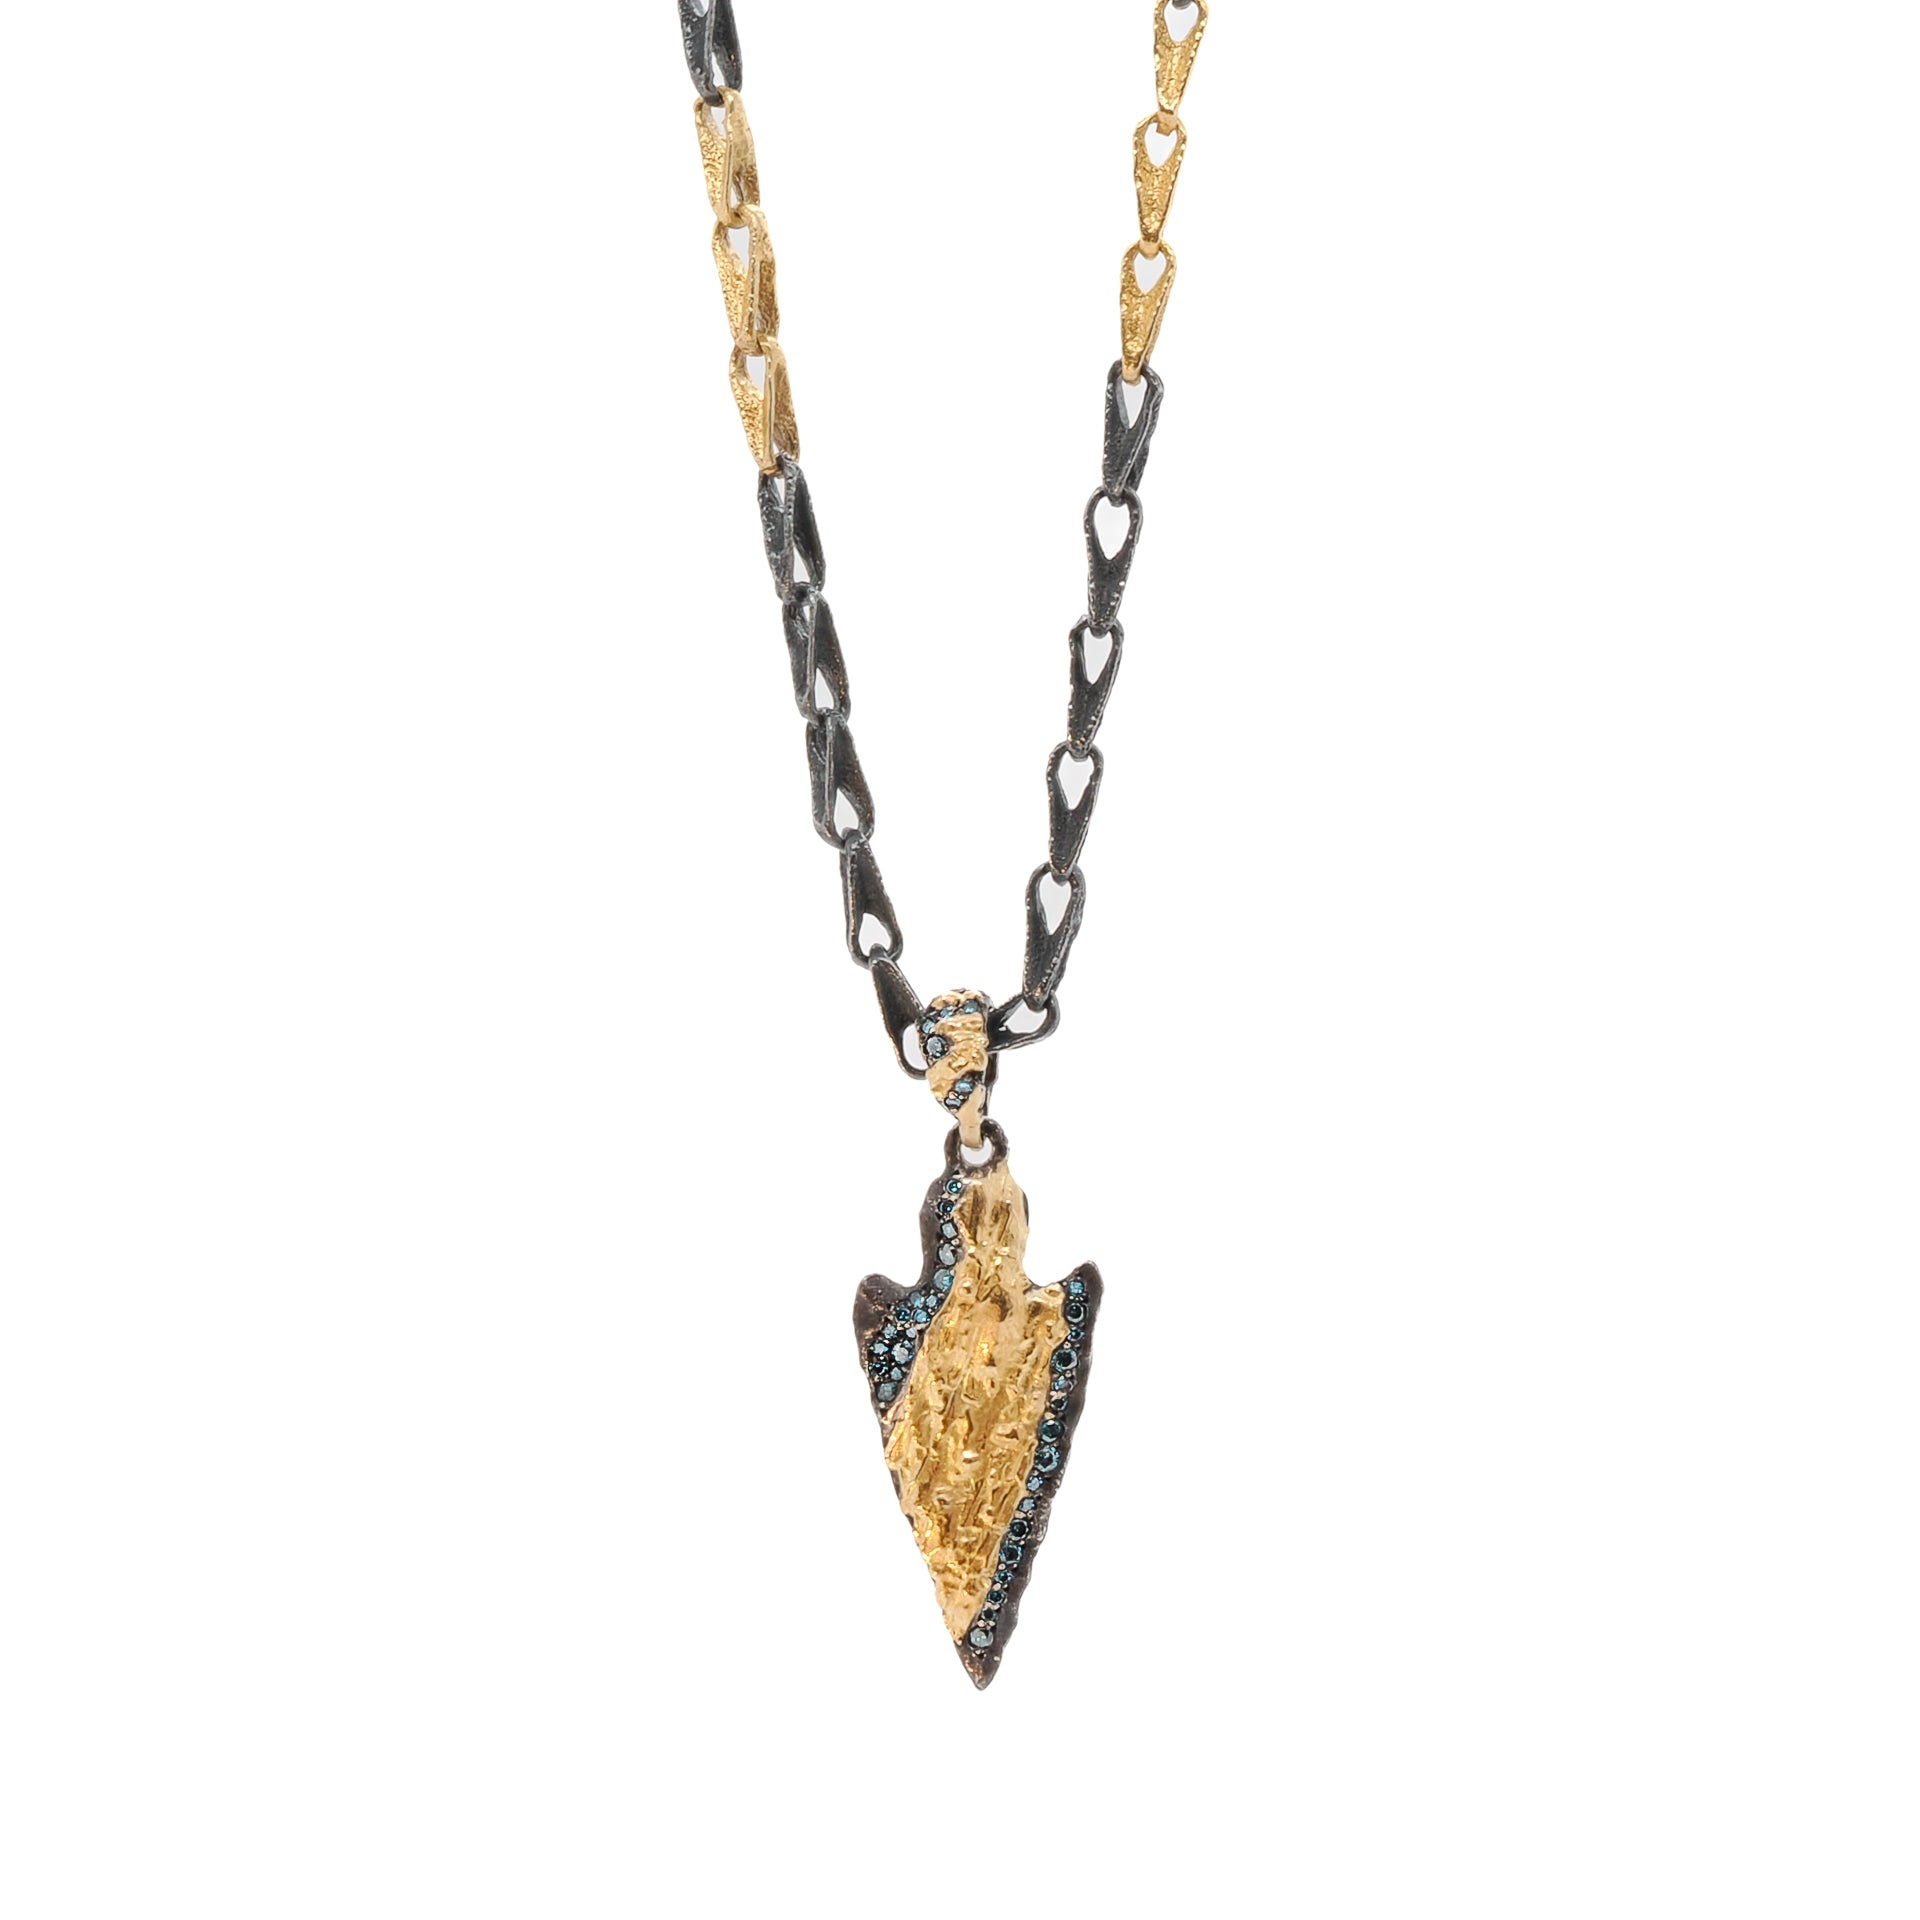 Nature Arrow Necklace featuring a unique handmade design crafted from high-quality 21k gold over silver, adorned with 0.7 crt petroleum diamonds.